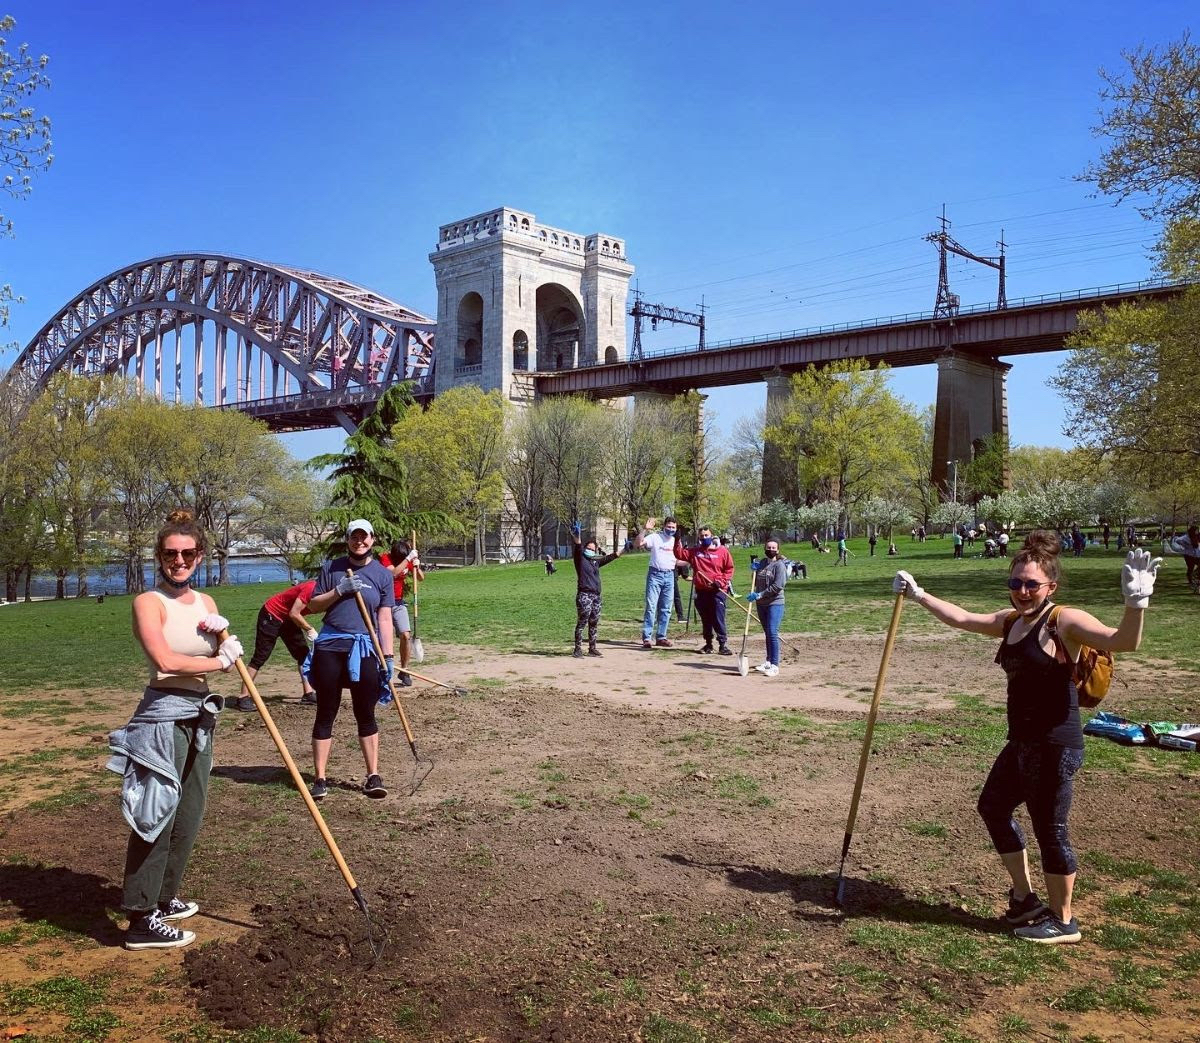 The Astoria Park Alliance will be hosting a Volunteer Cleanup in celebration of Earth Day